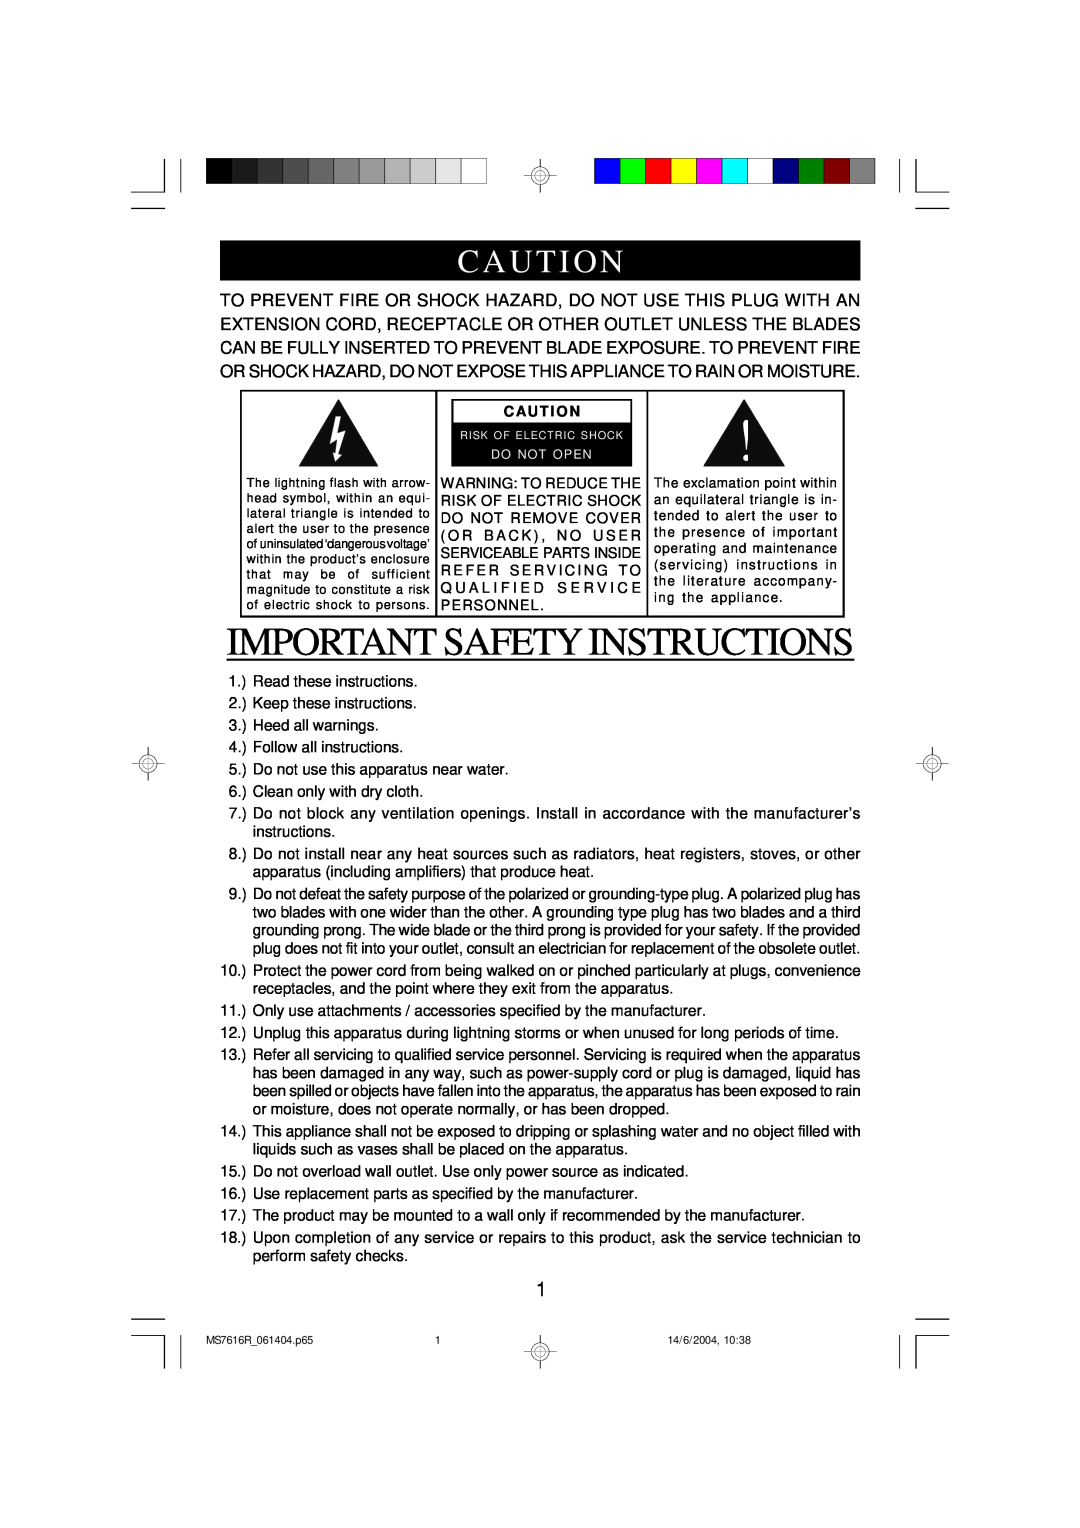 Emerson MS7616R owner manual Important Safety Instructions, Caut I On, Caut I O N 